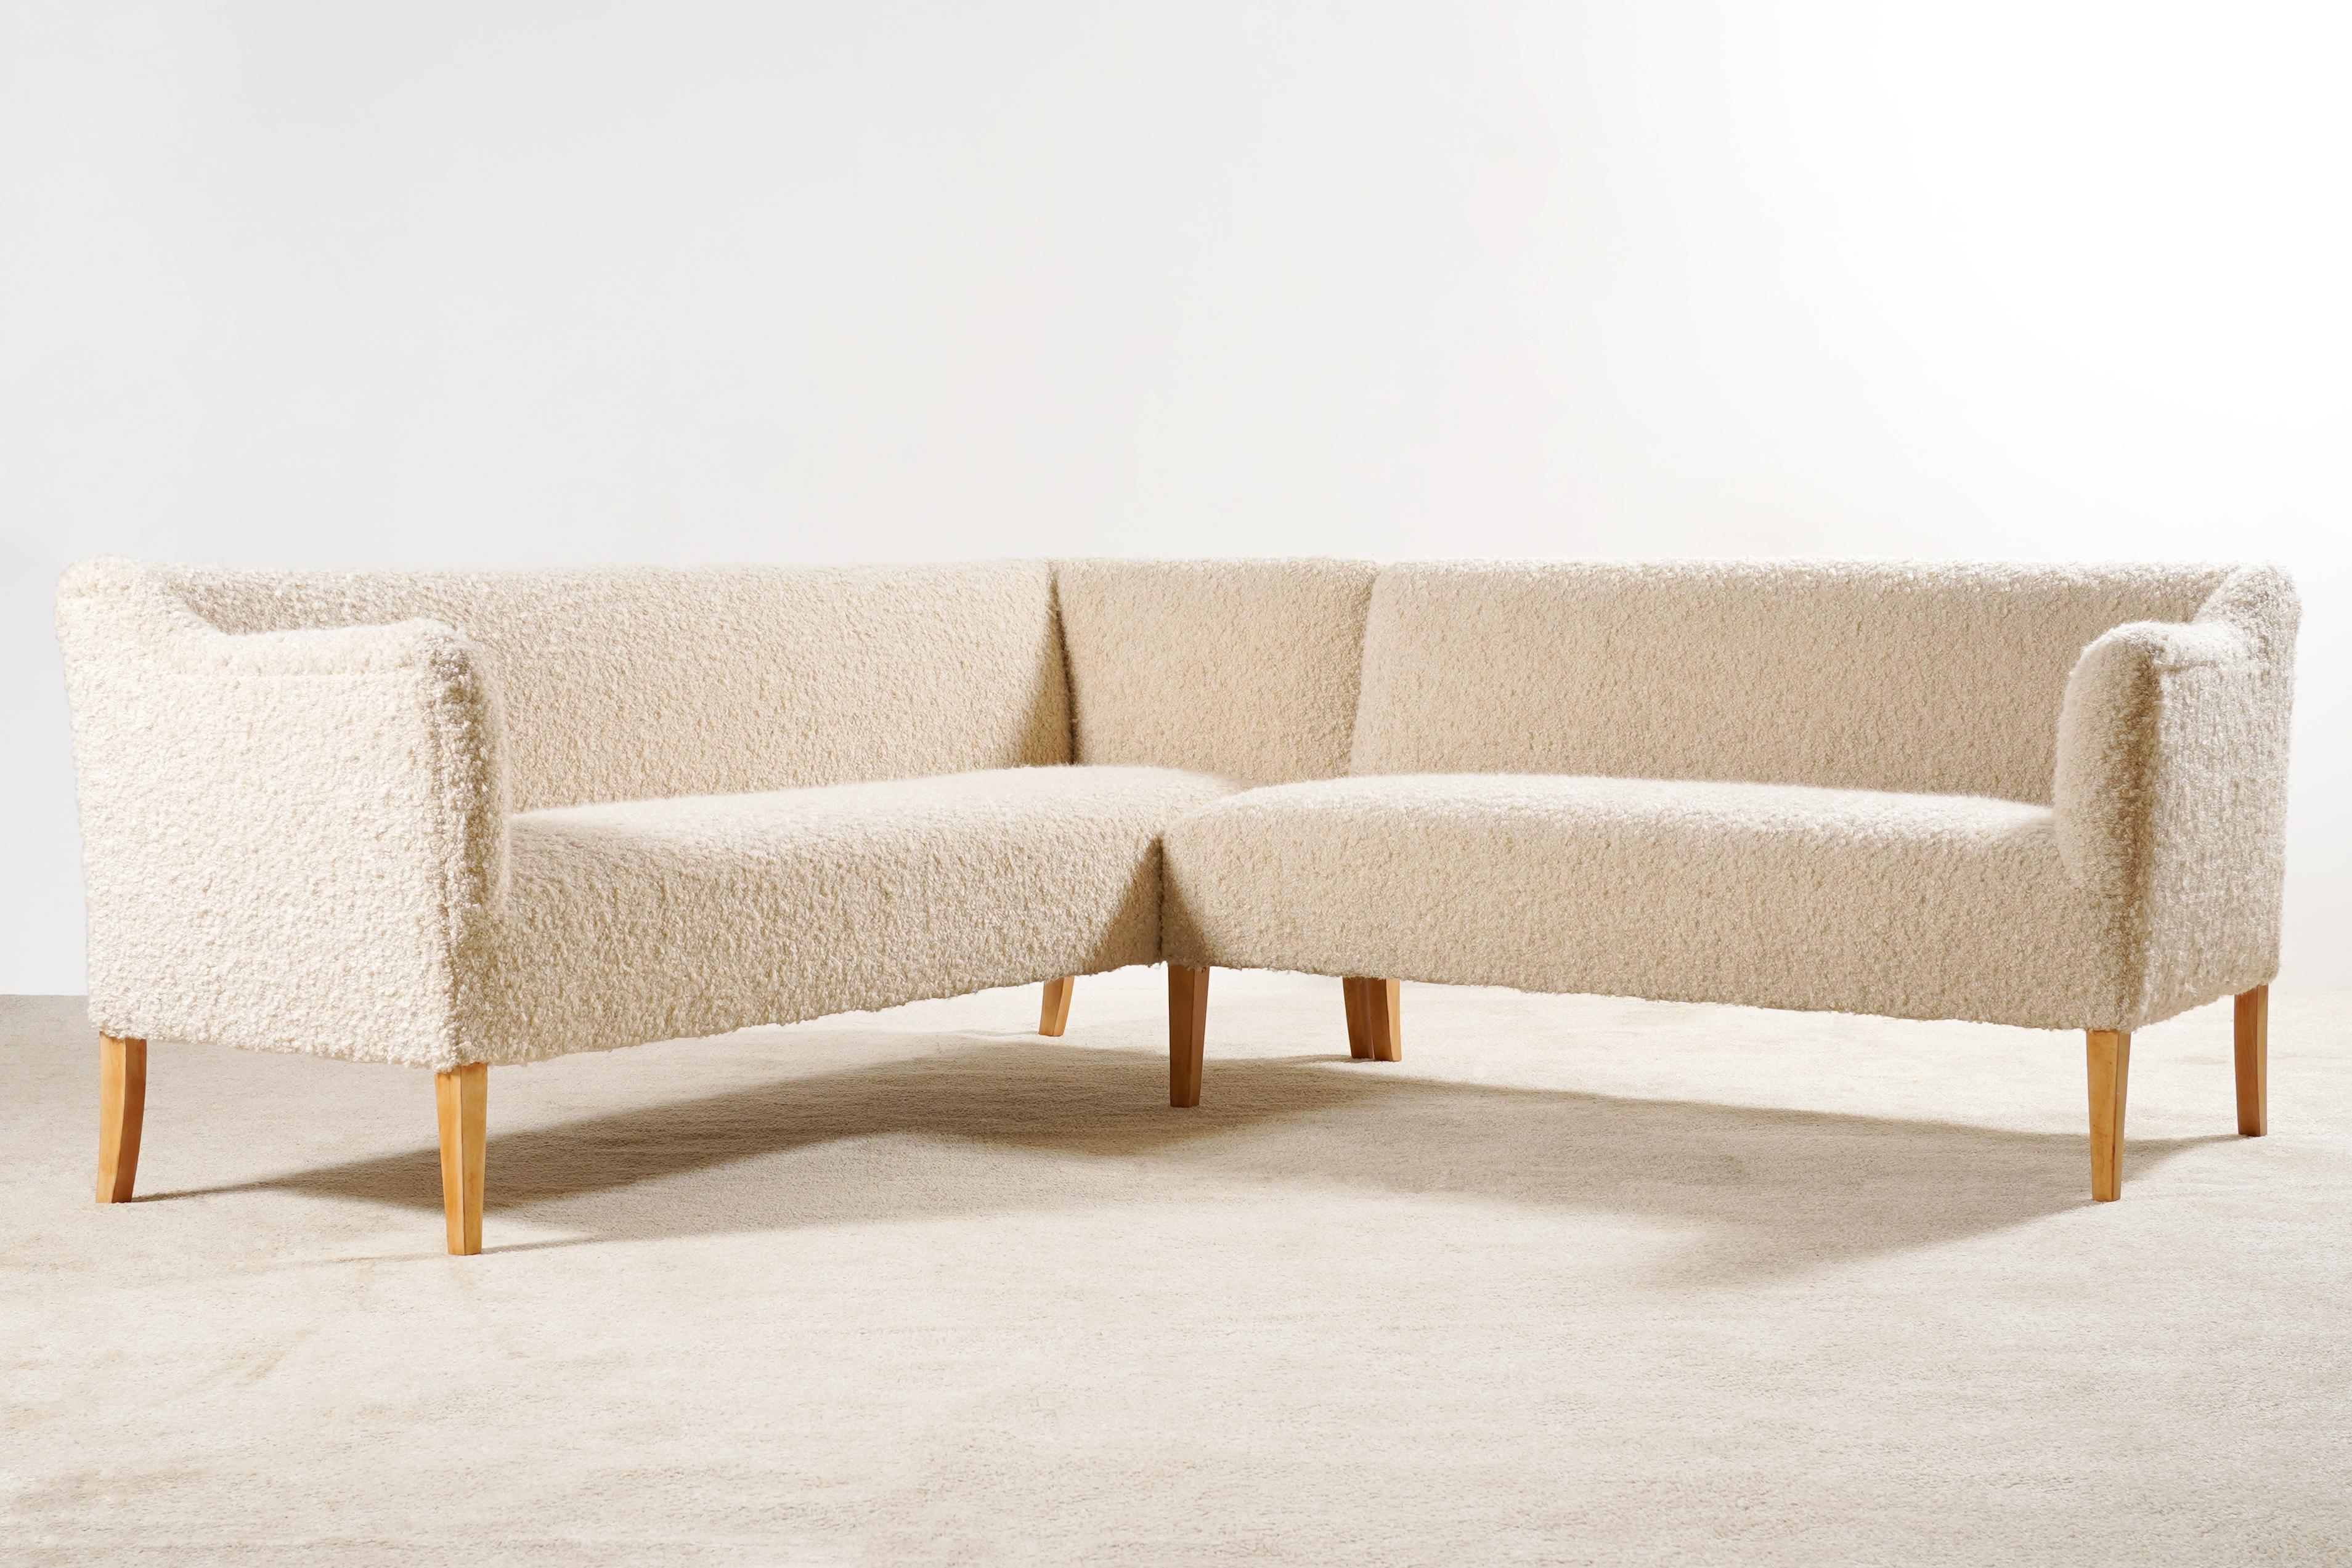 This sofa is composed of two separated parts that are placed together to form a corner sofa.
It was not designed to be placed apart as two separate elements.
Lovely shape and curves. Very comfortable seat.
Beechwood natural color waxed